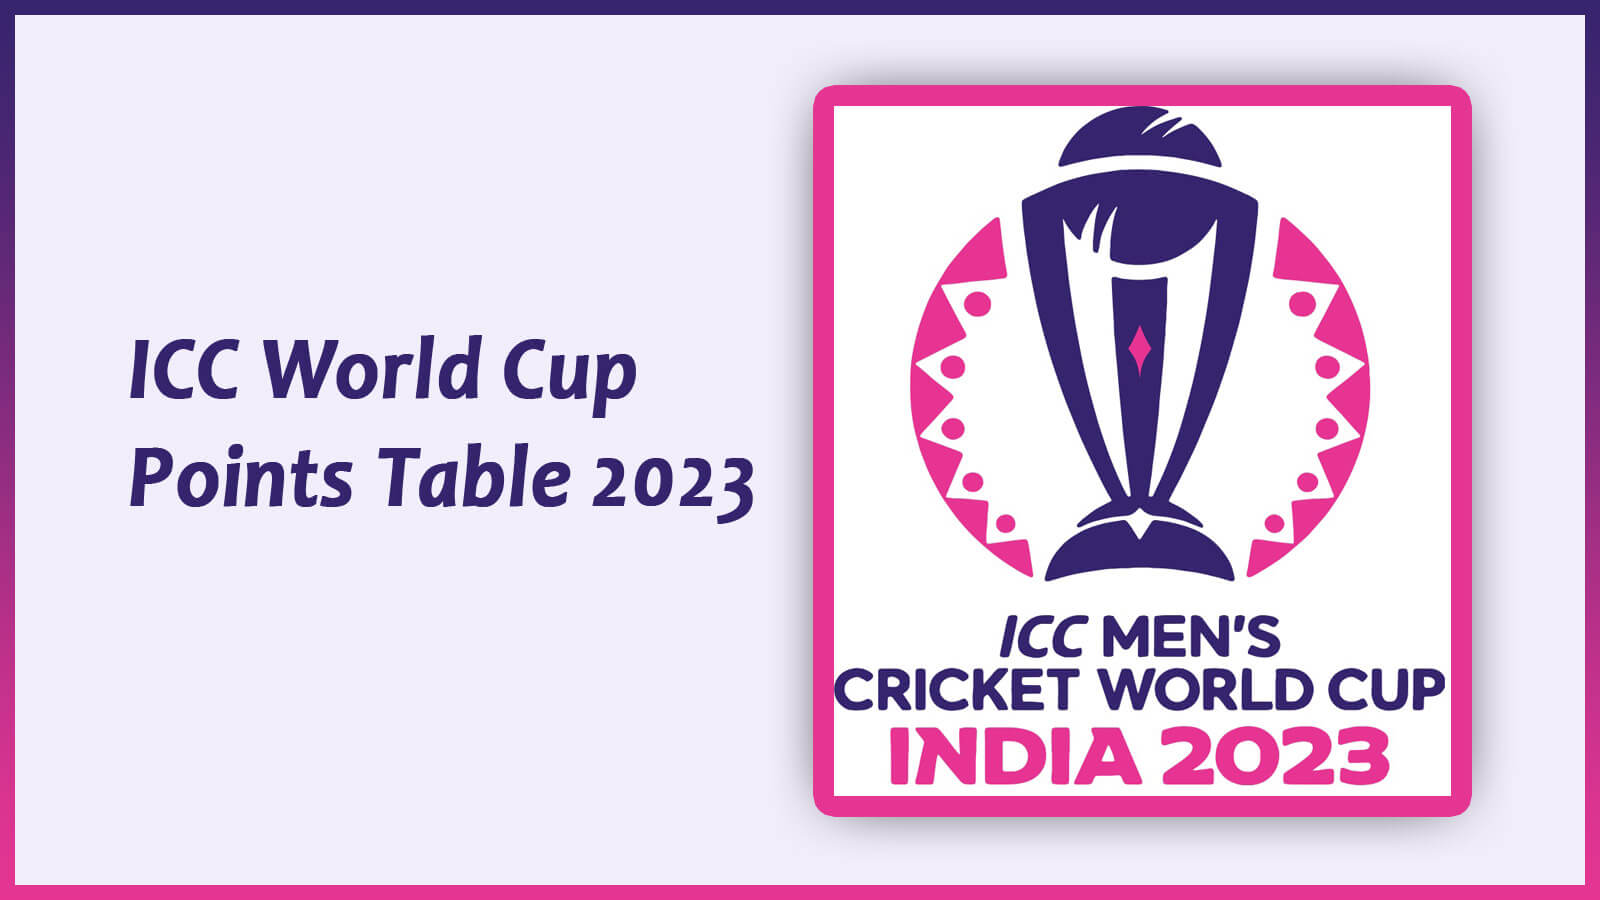 Icc World Cup Points Table